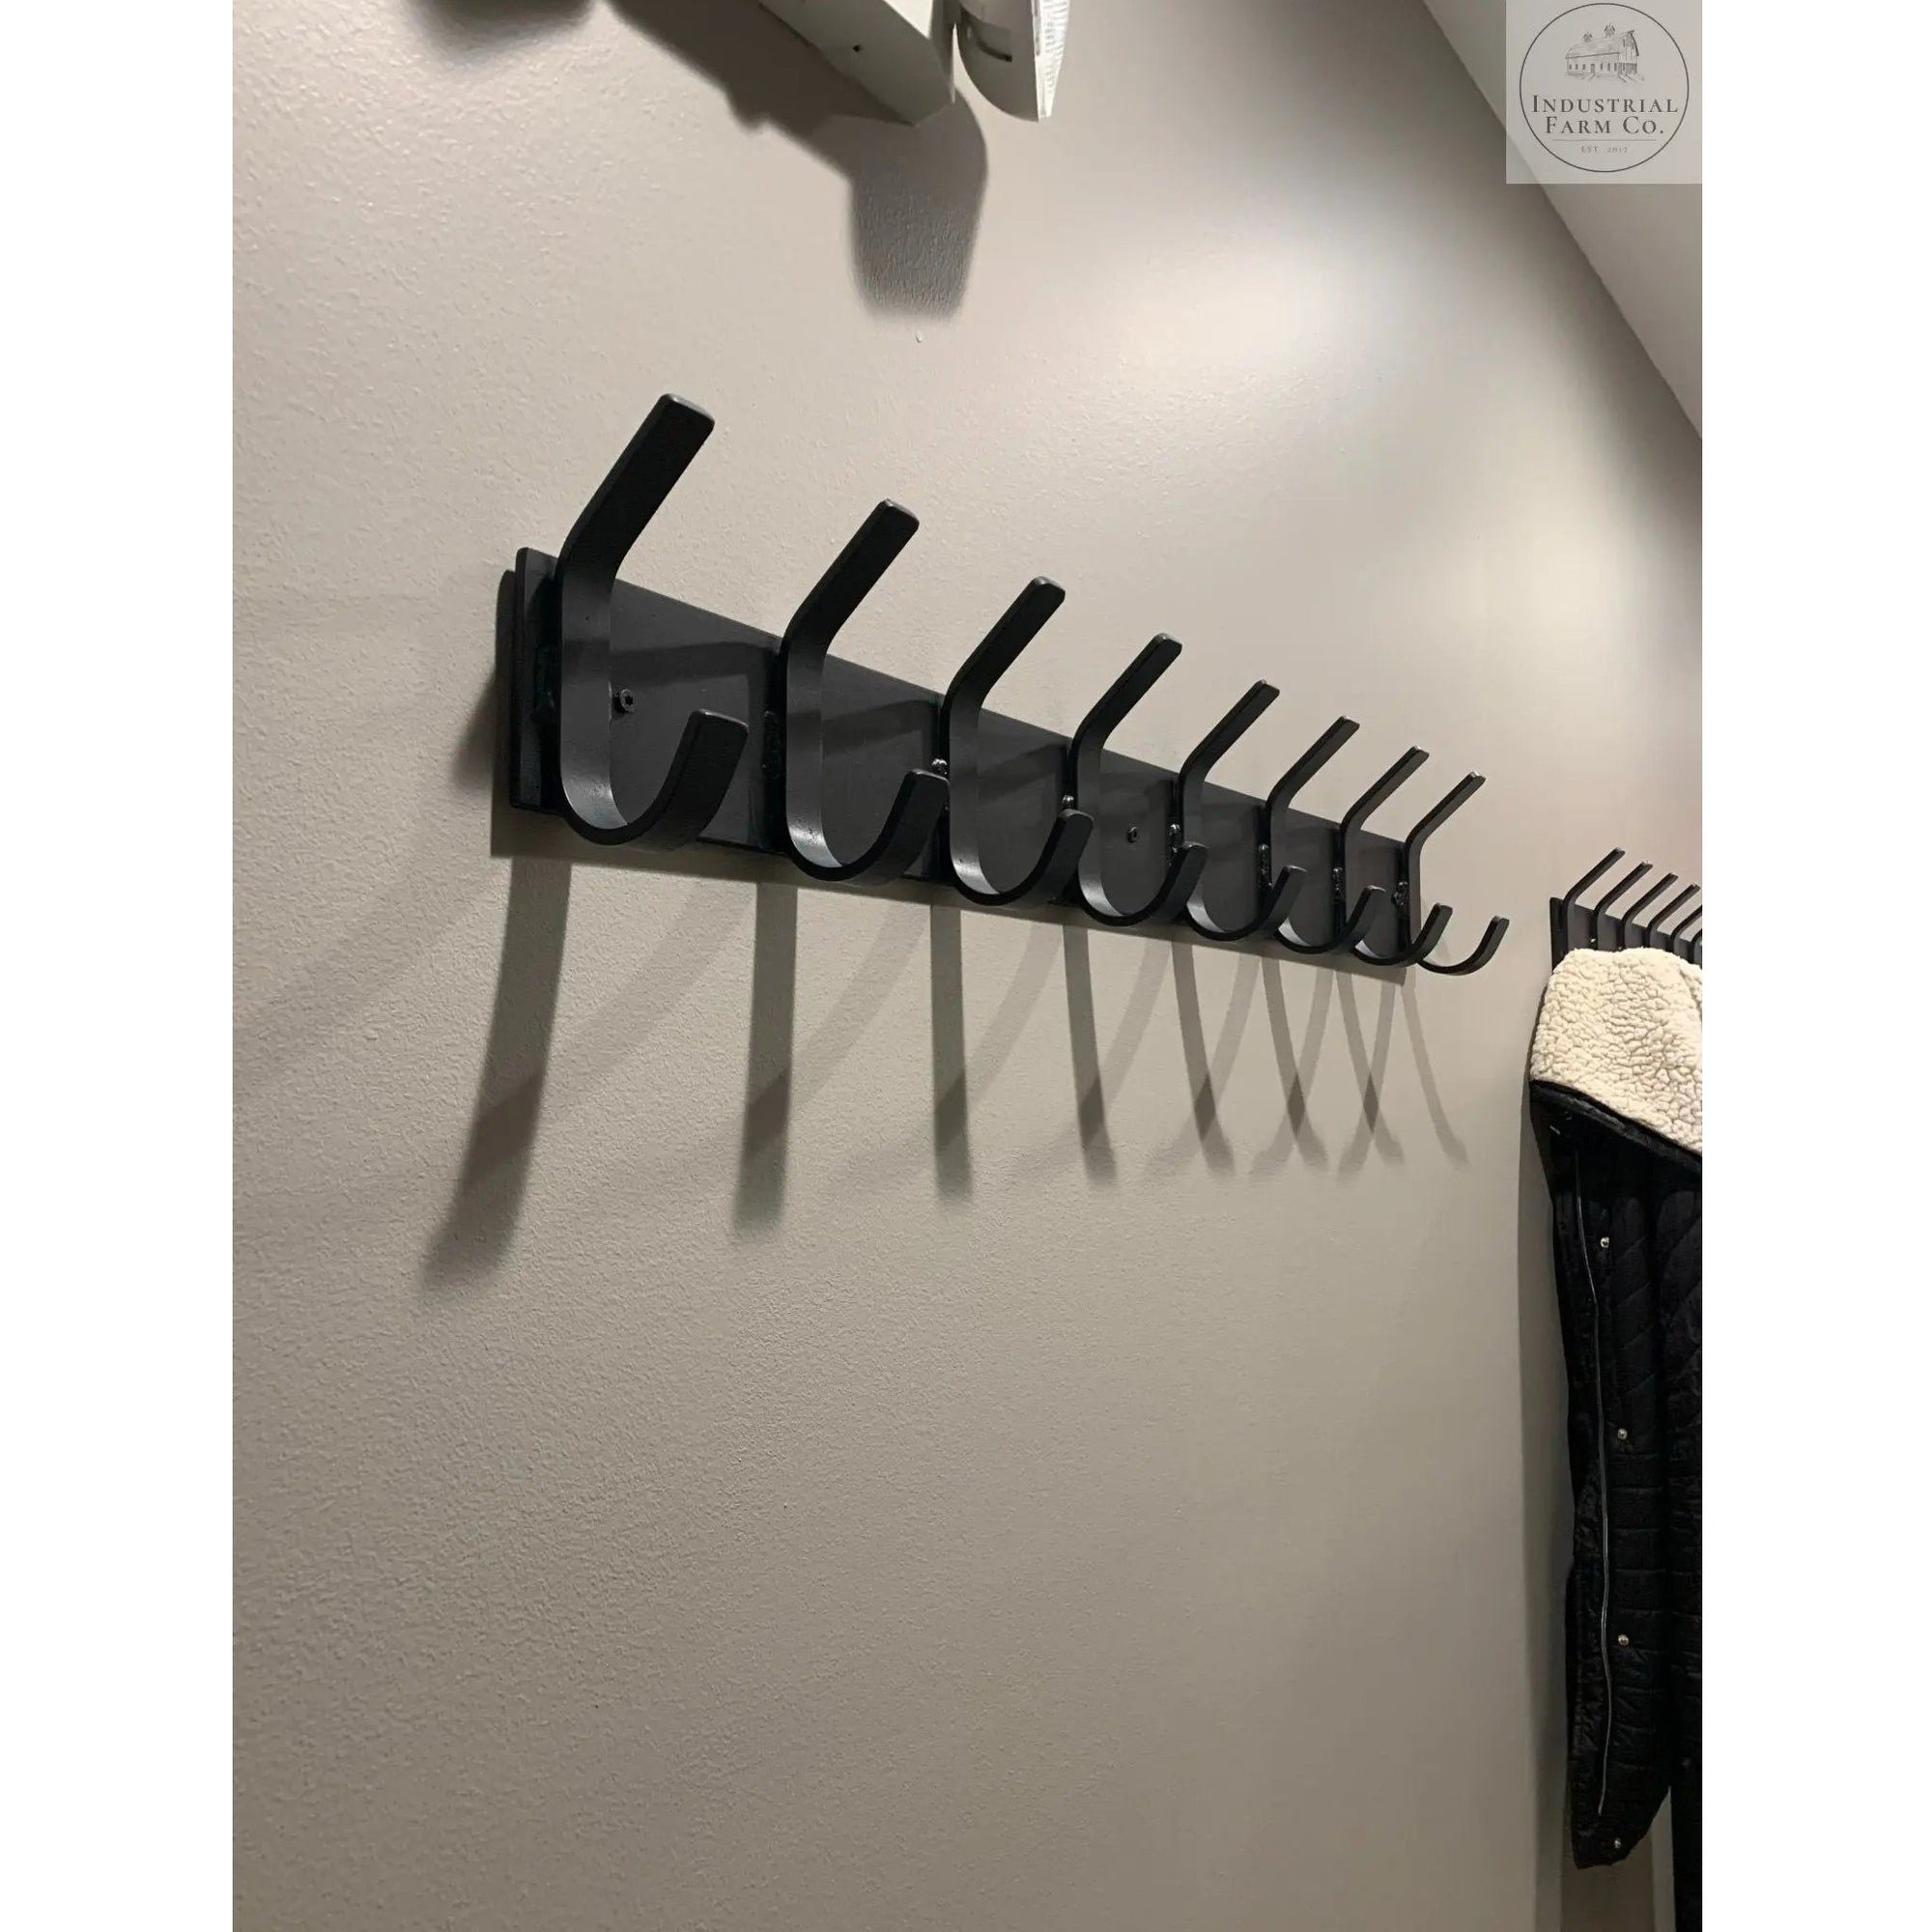 The Riseform Wall Mounted Metal Coat Rack - Industrial Farm Co